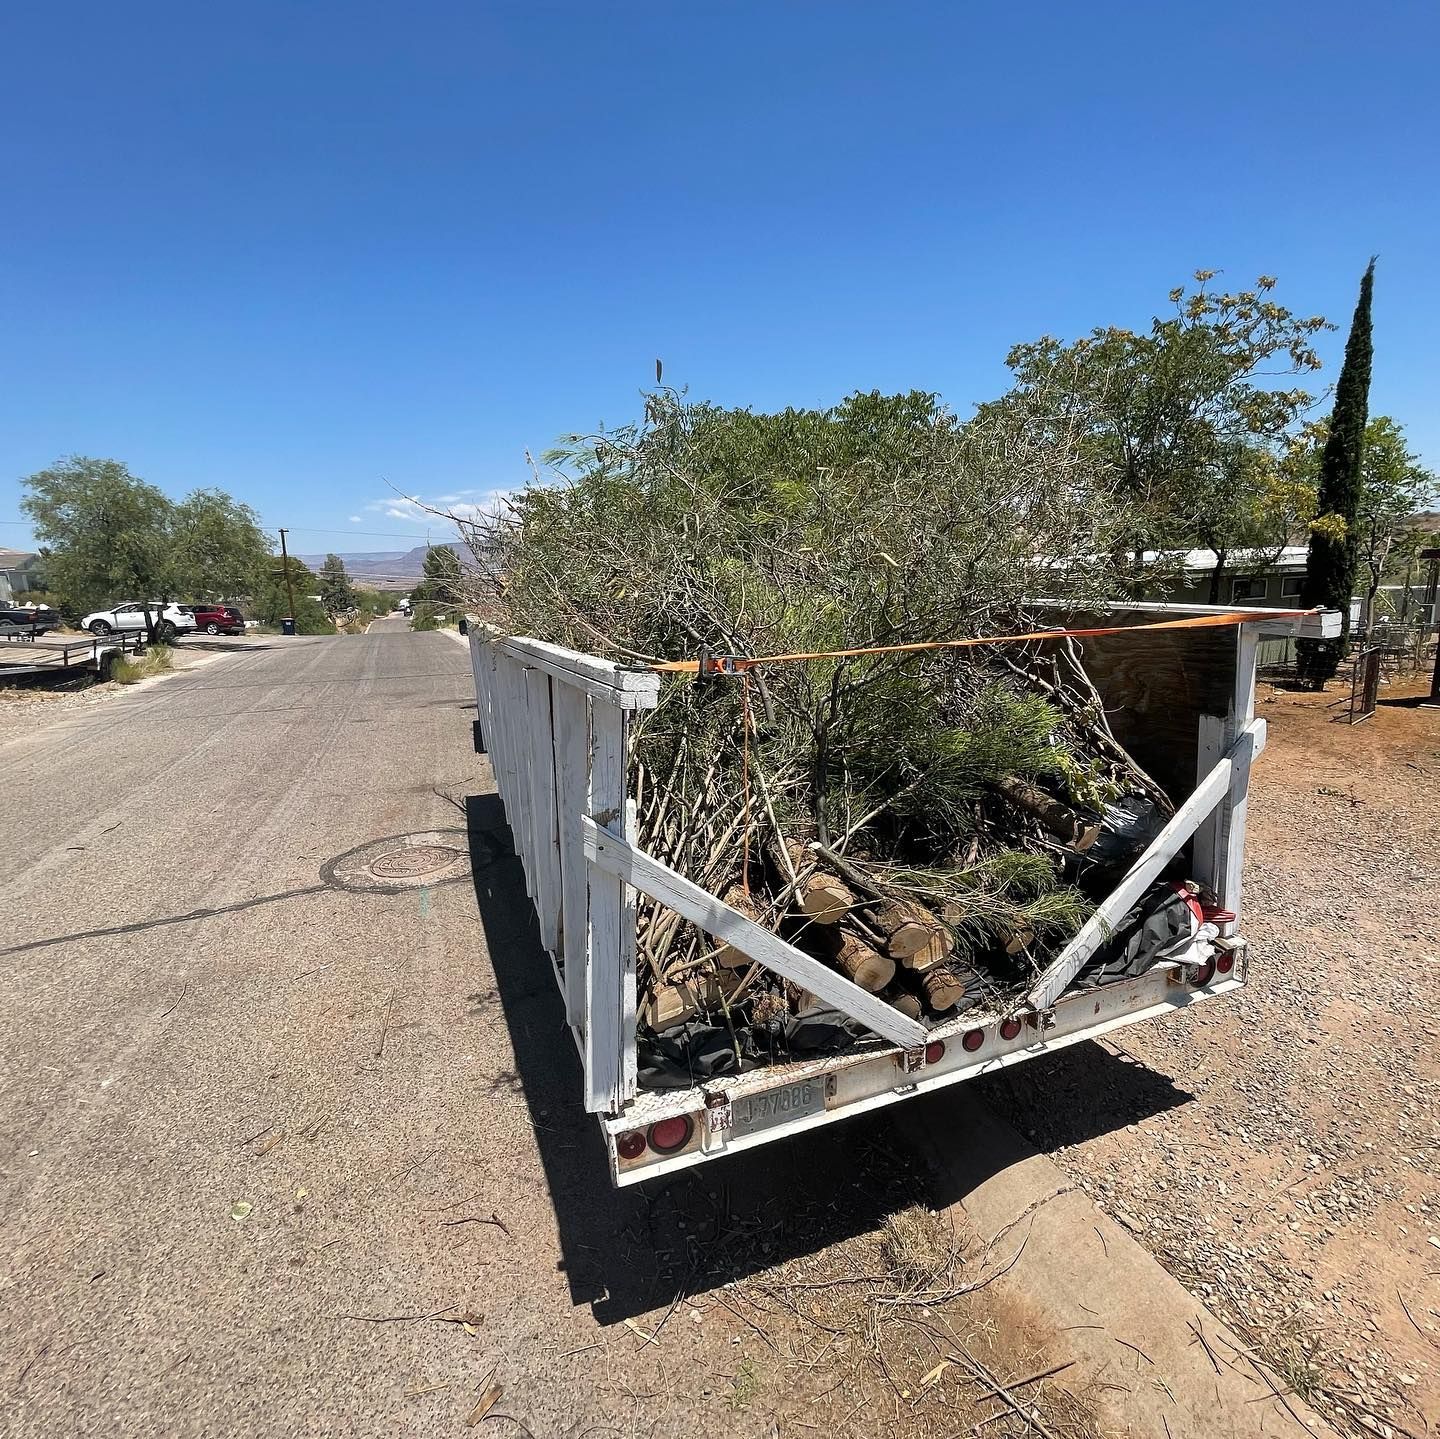 Yard Waste Removal for FFC Property Care Solutions in Camp Verde, Arizona